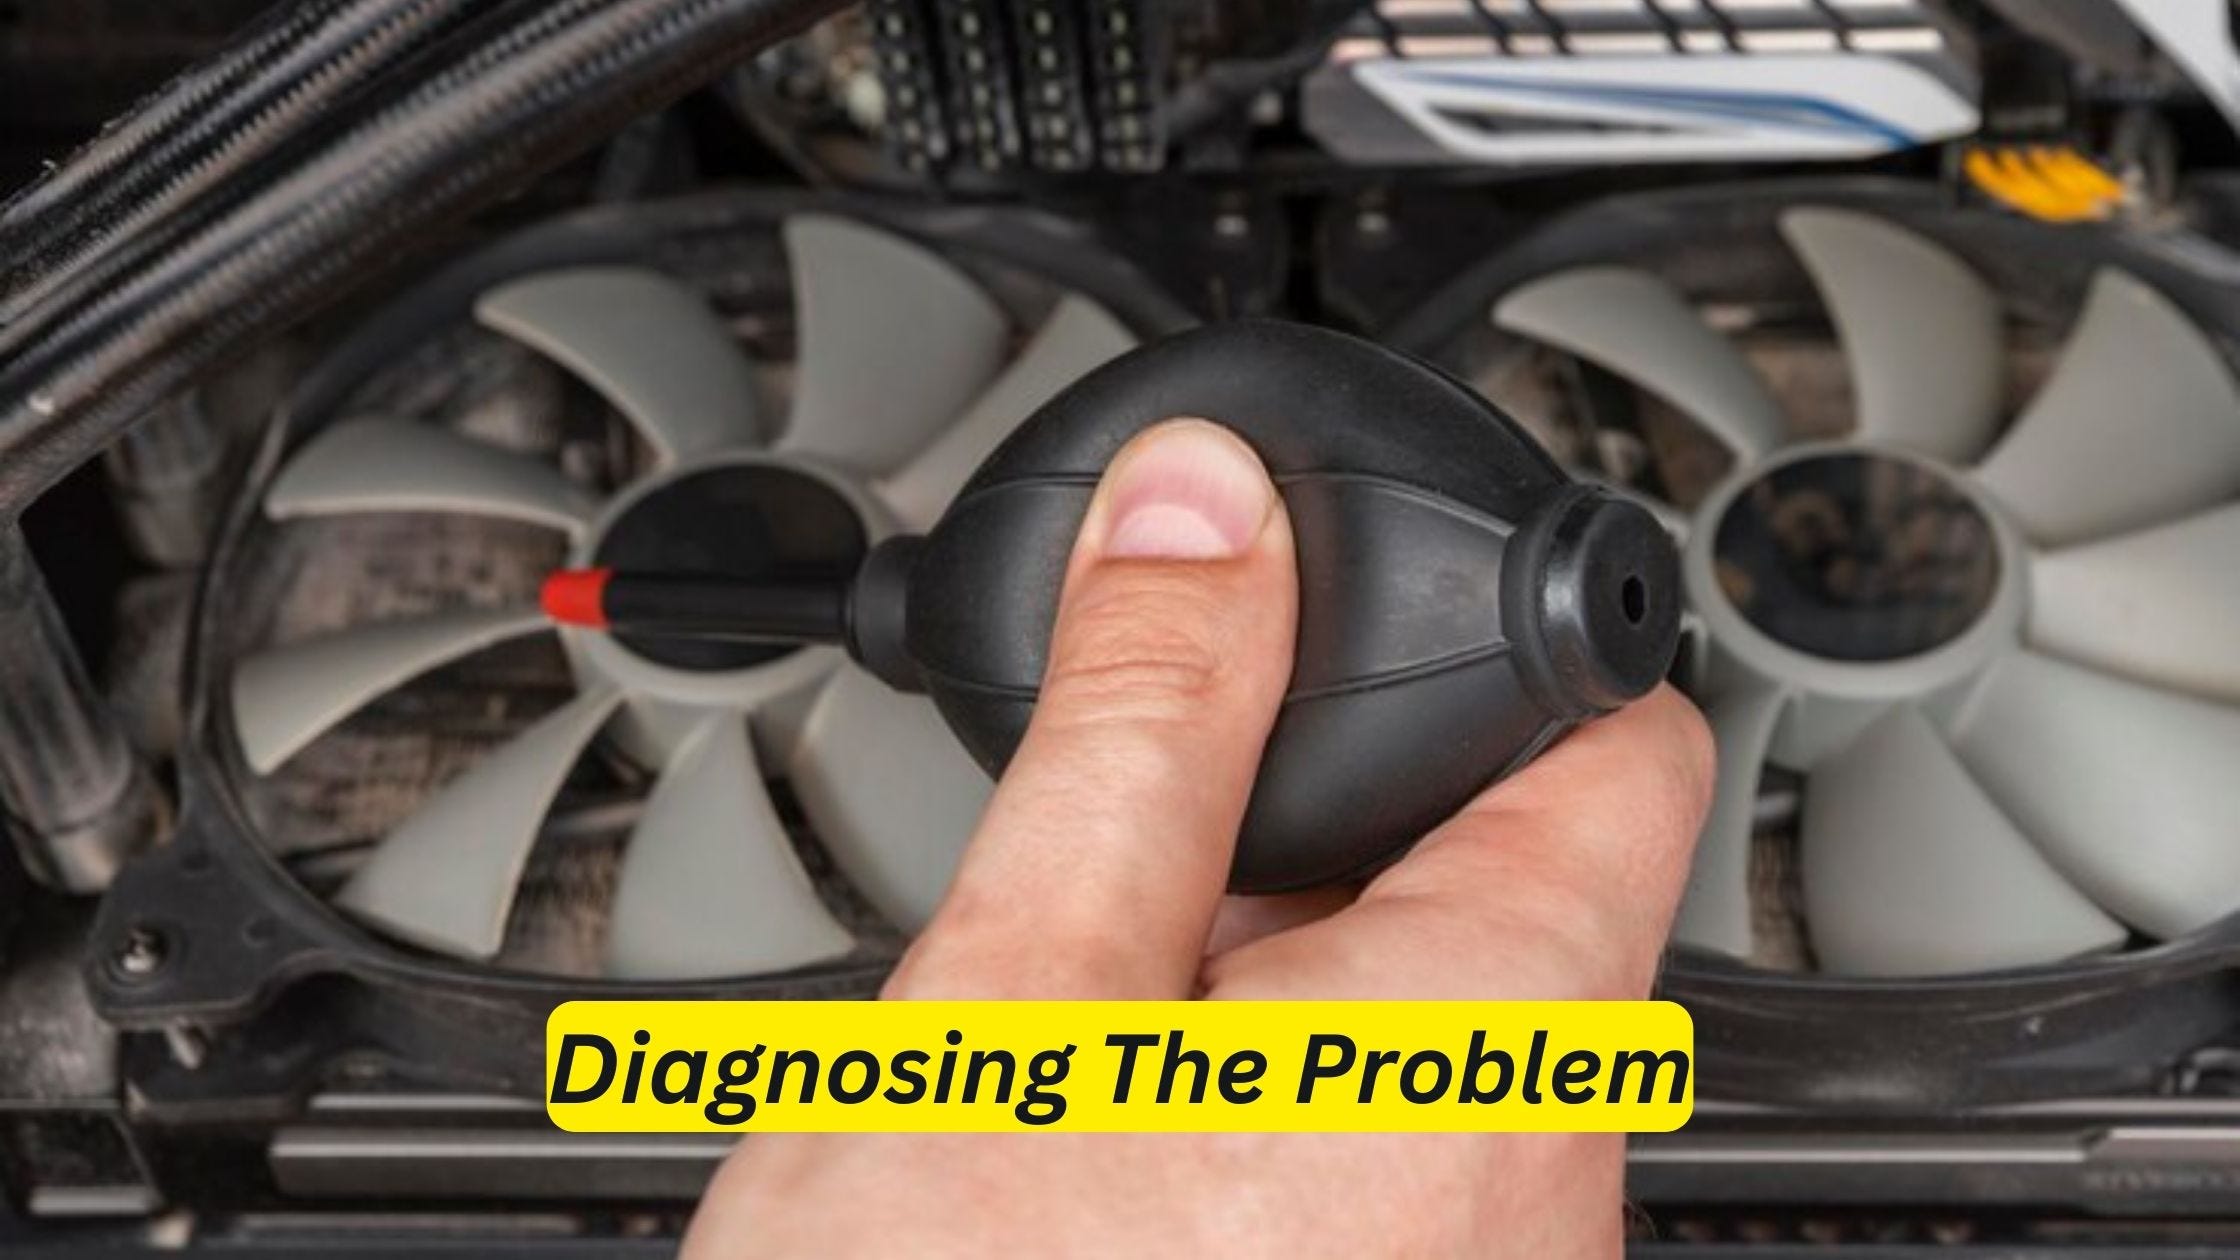 Why Does My Car Fan Keep Turning on and Off? Find Solutions Here